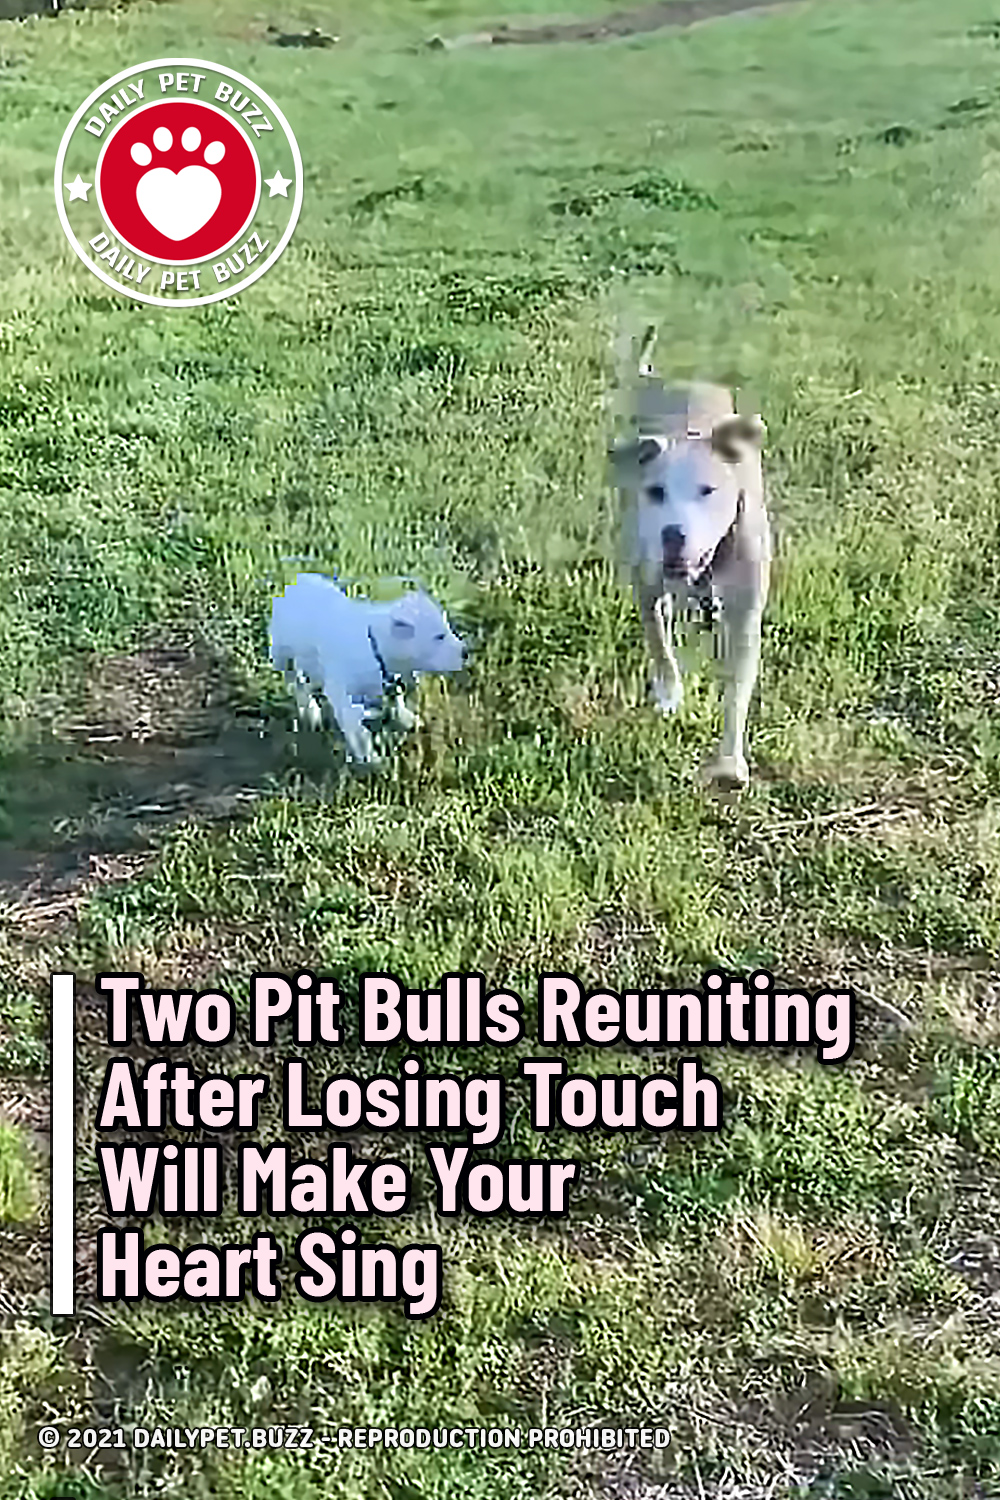 Two Pit Bulls Reuniting After Losing Touch Will Make Your Heart Sing